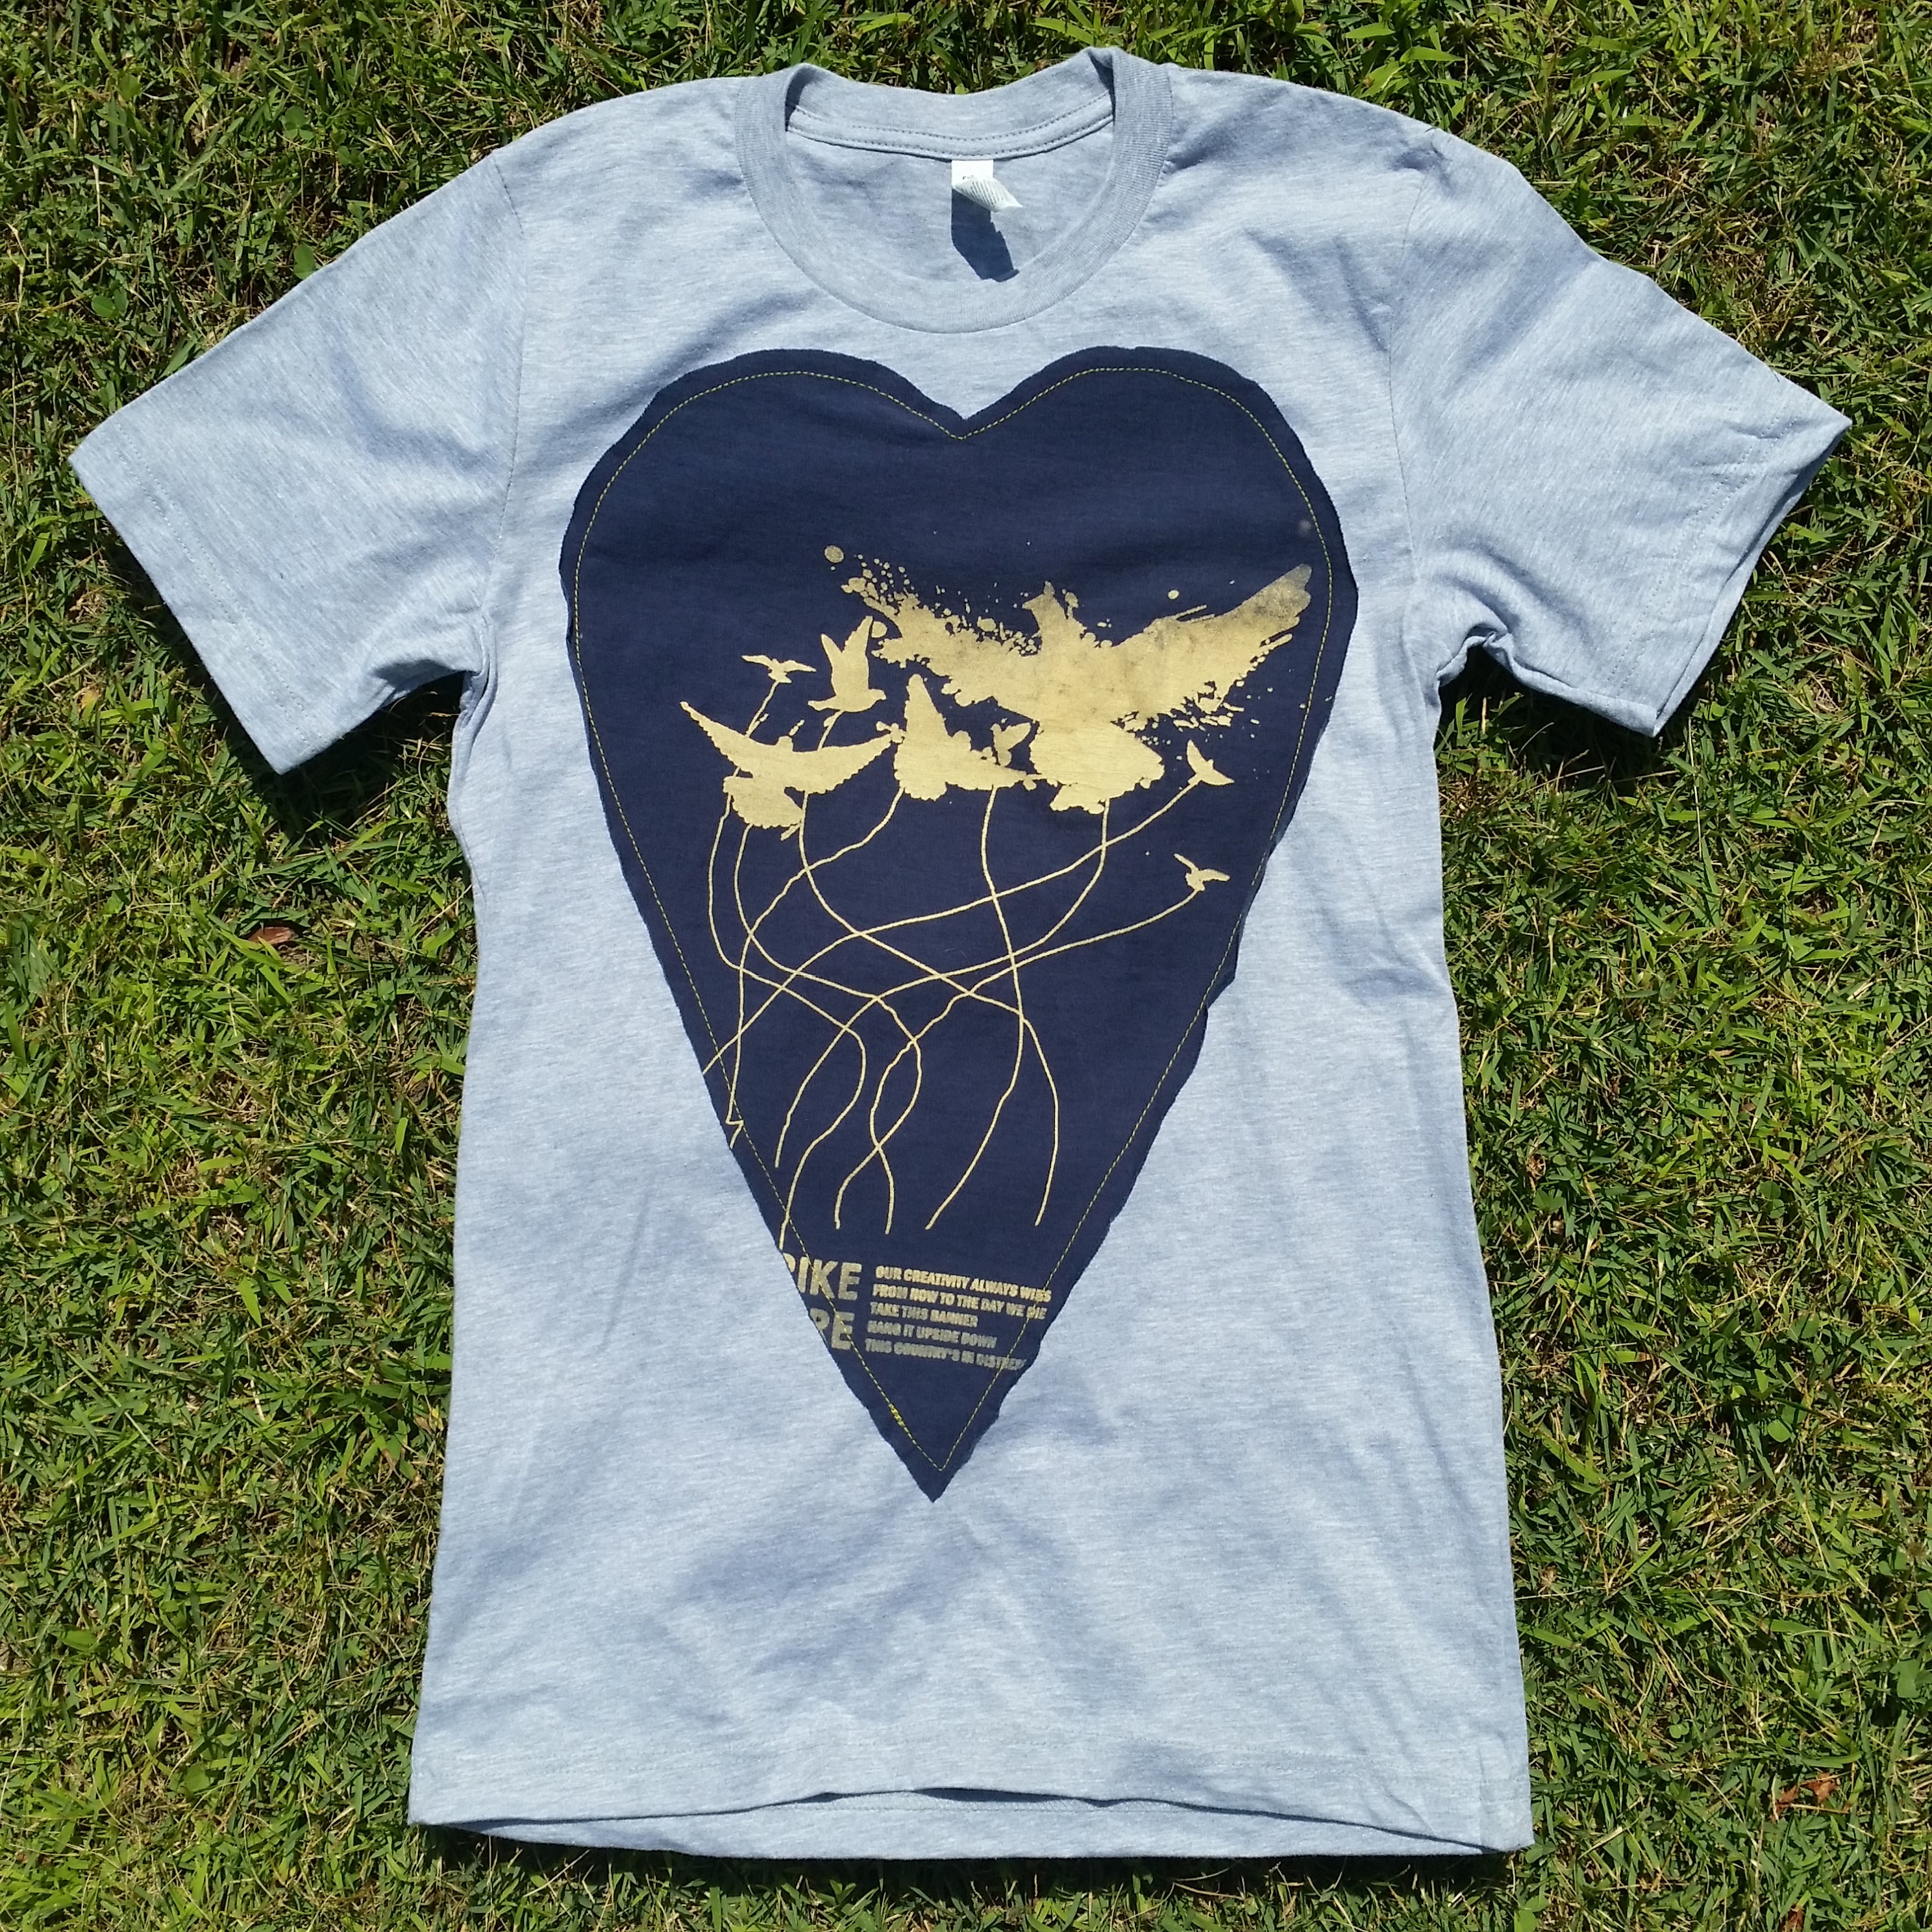 One of a Kind (Men's S) Heart Patch Birds T-Shirt